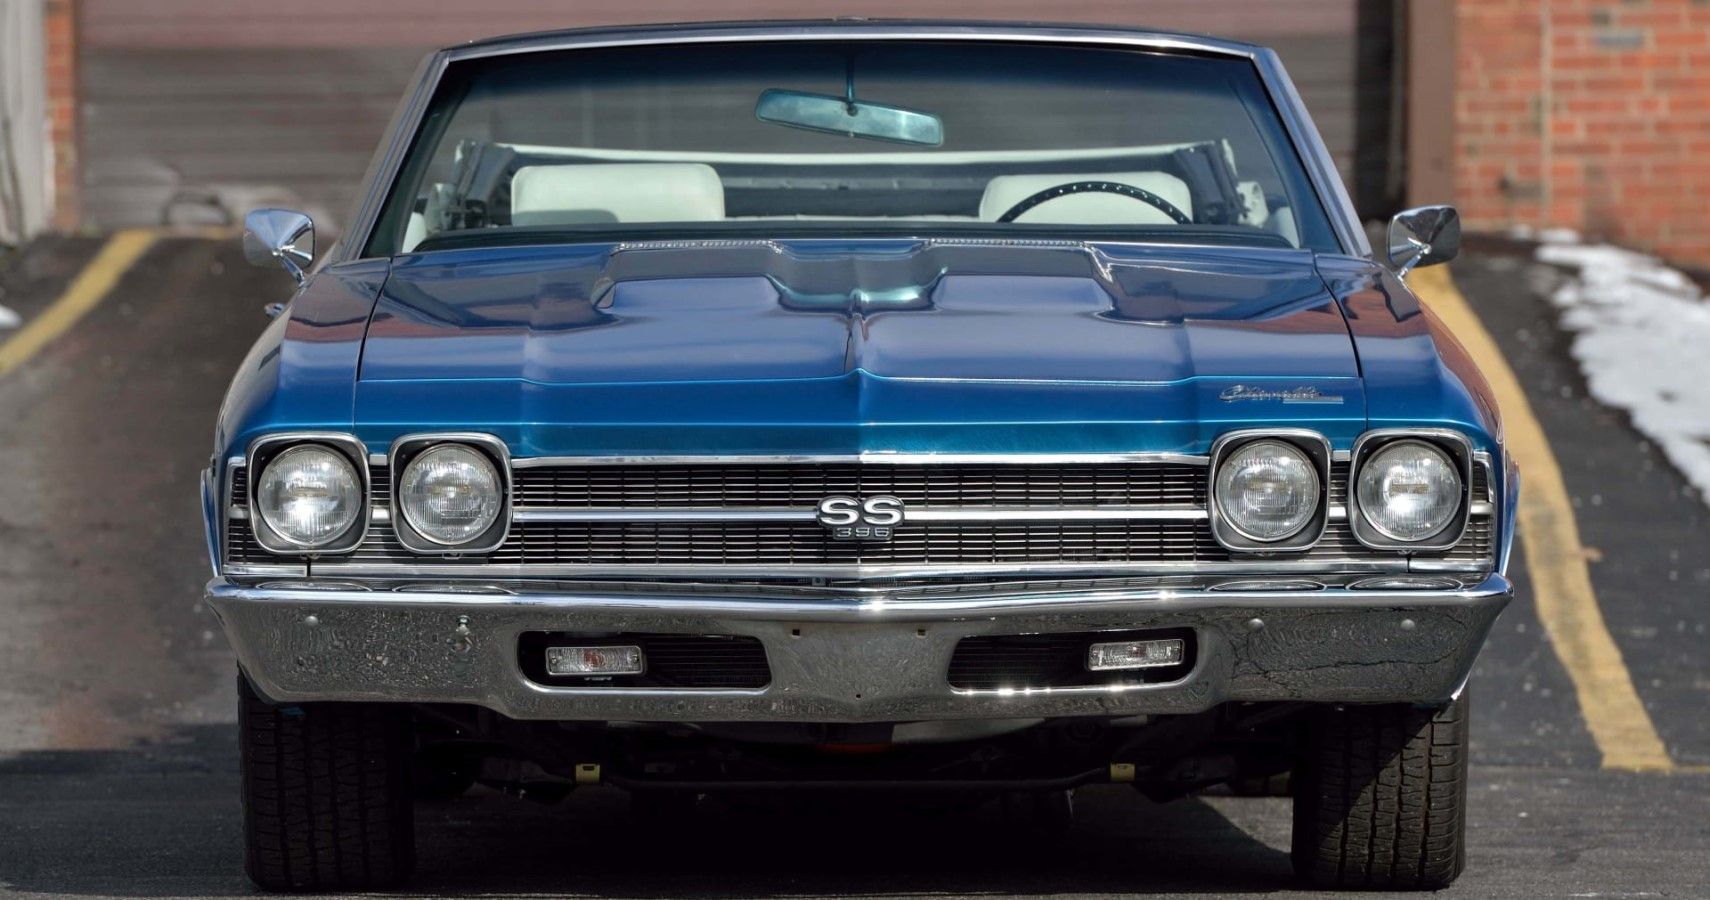 Bruce Springsteen‘s Old 1969 Chevrolet Chevelle Convertible front fascia view